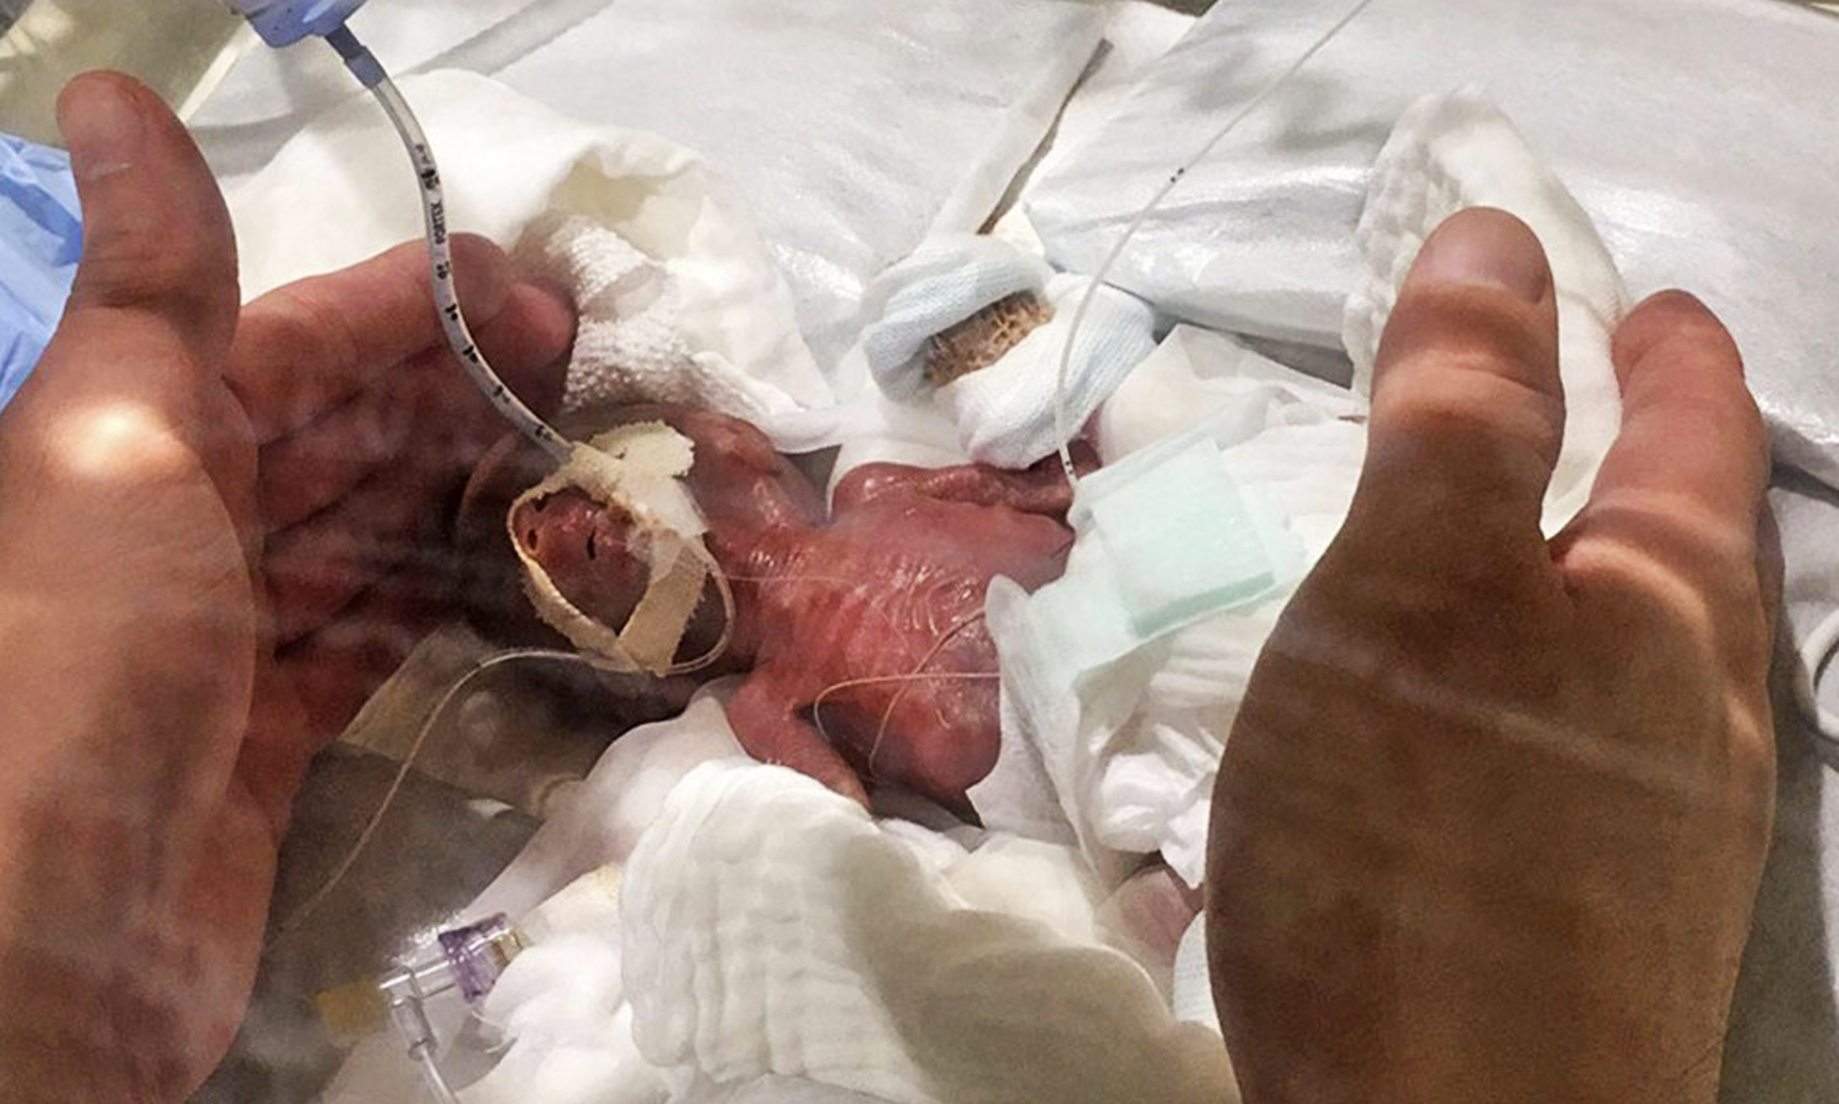 World’s smallest baby boy born weighing 268 grams returns home healthy